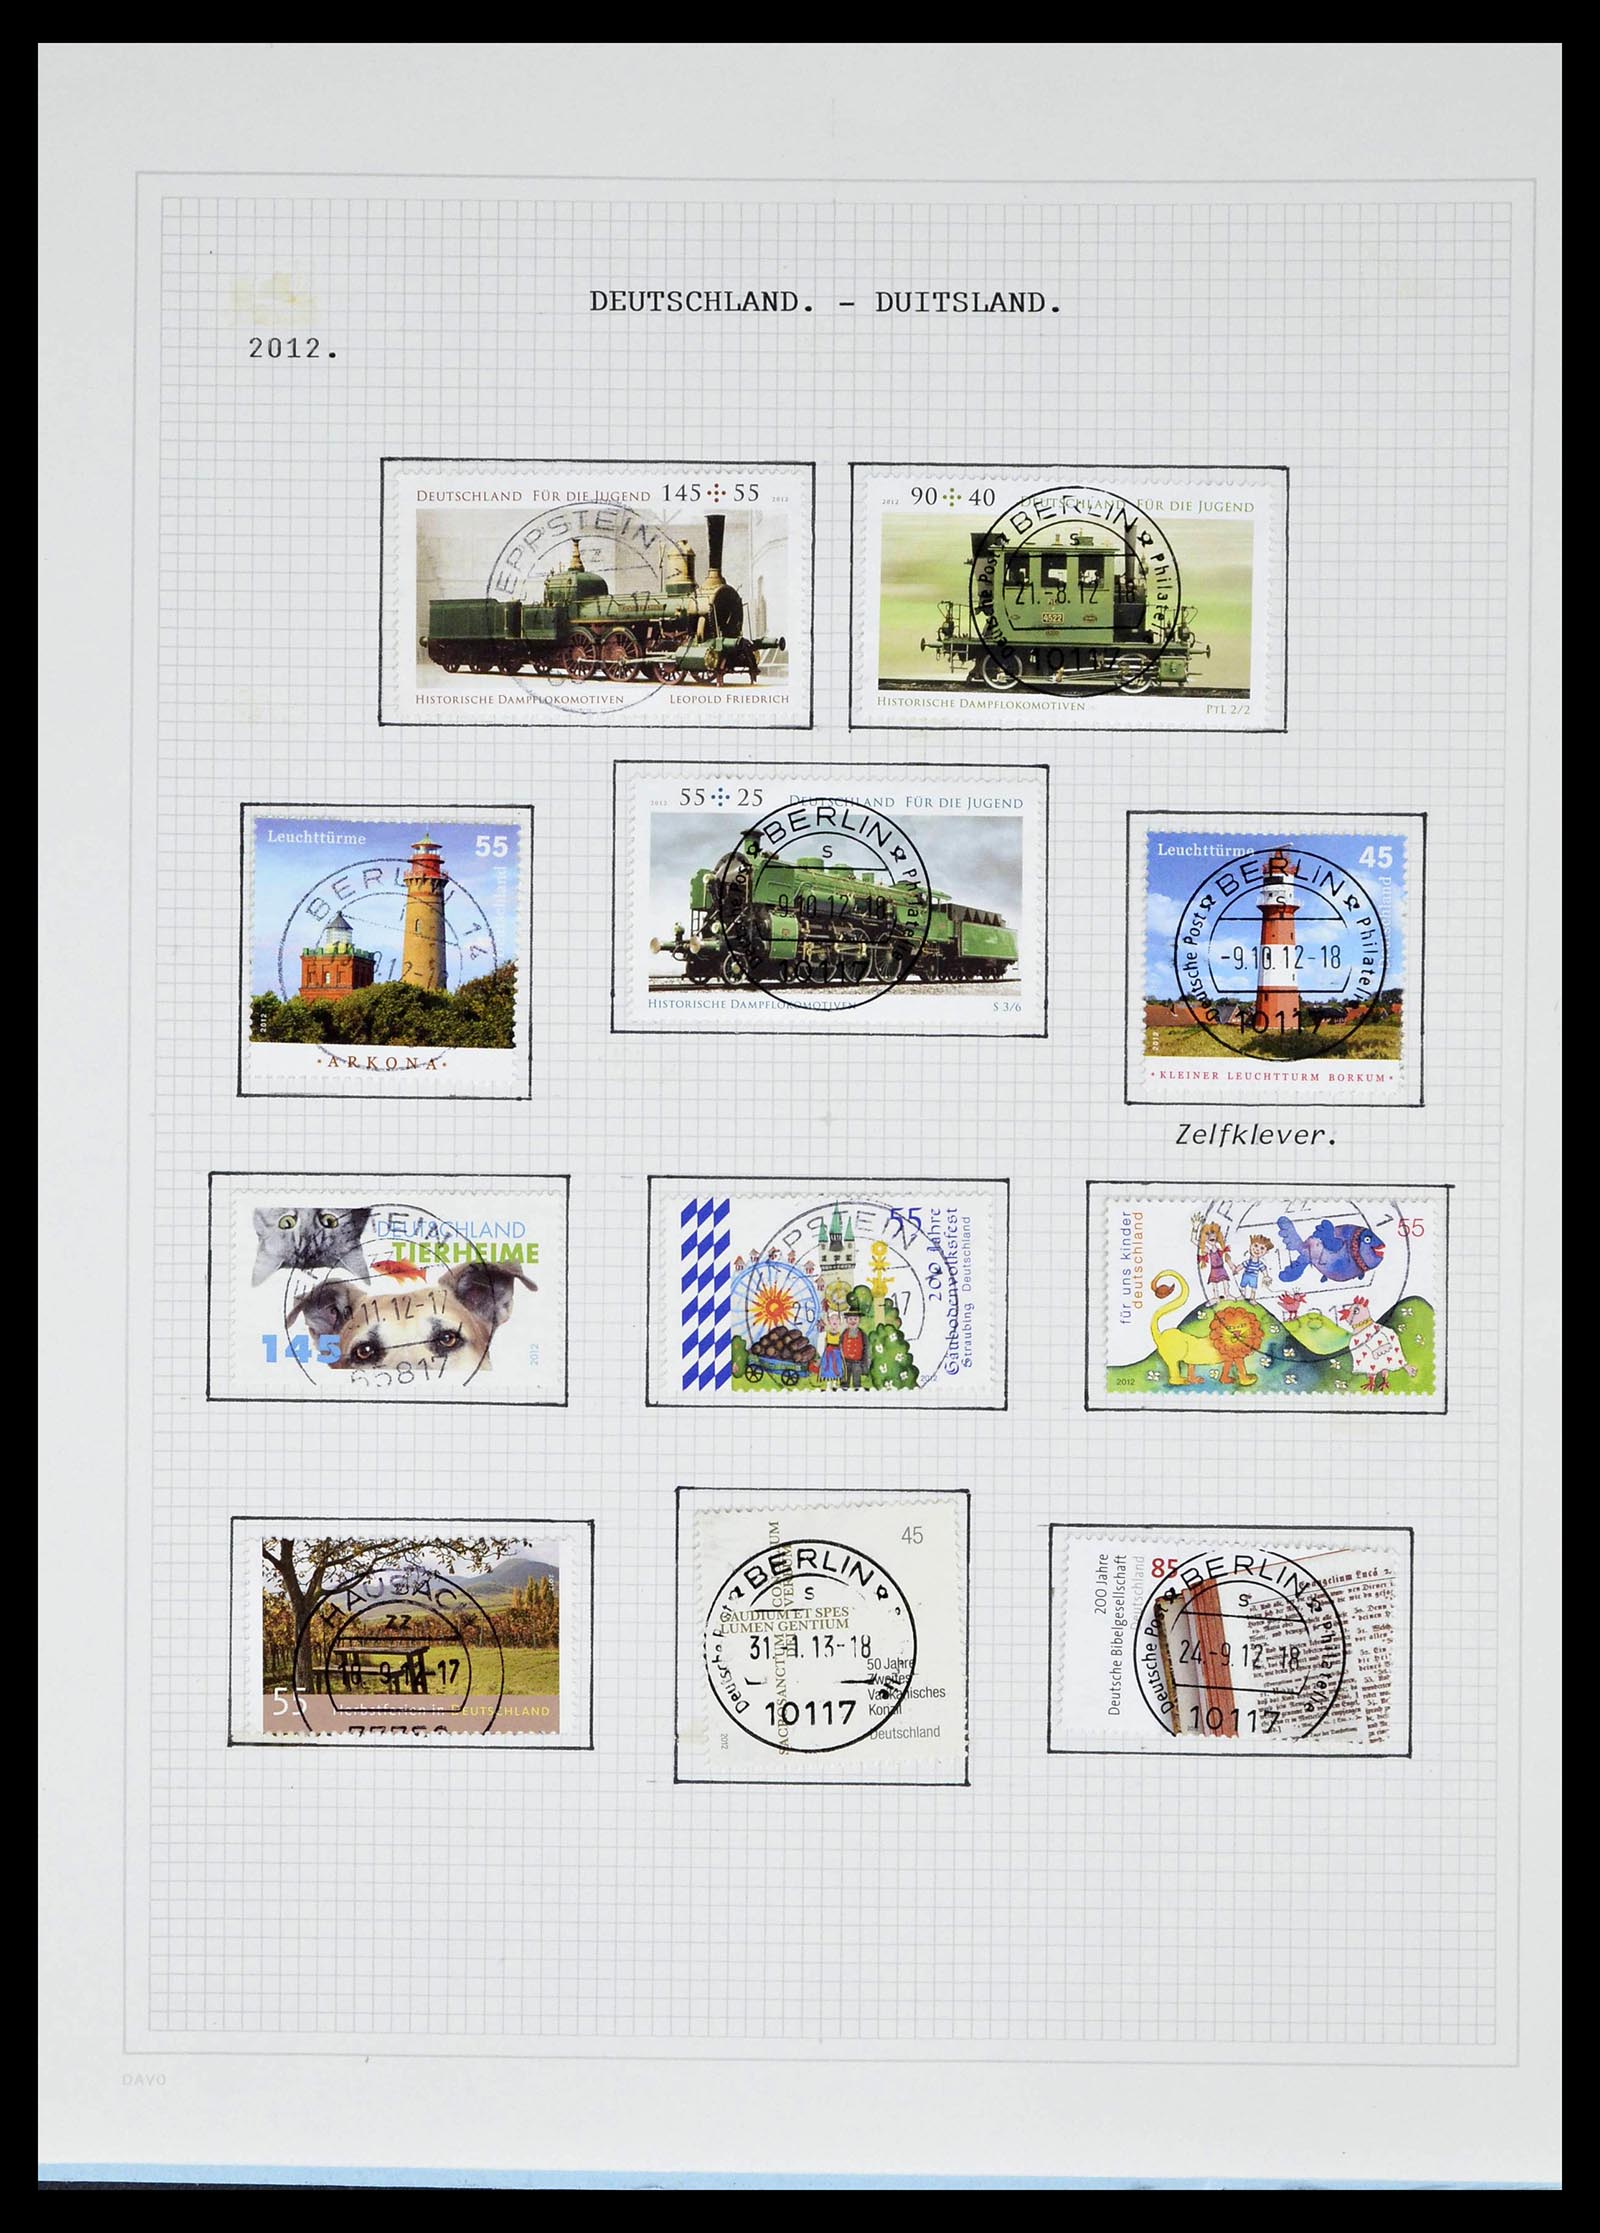 39324 0210 - Stamp collection 39324 Bundespost 1986-2012.